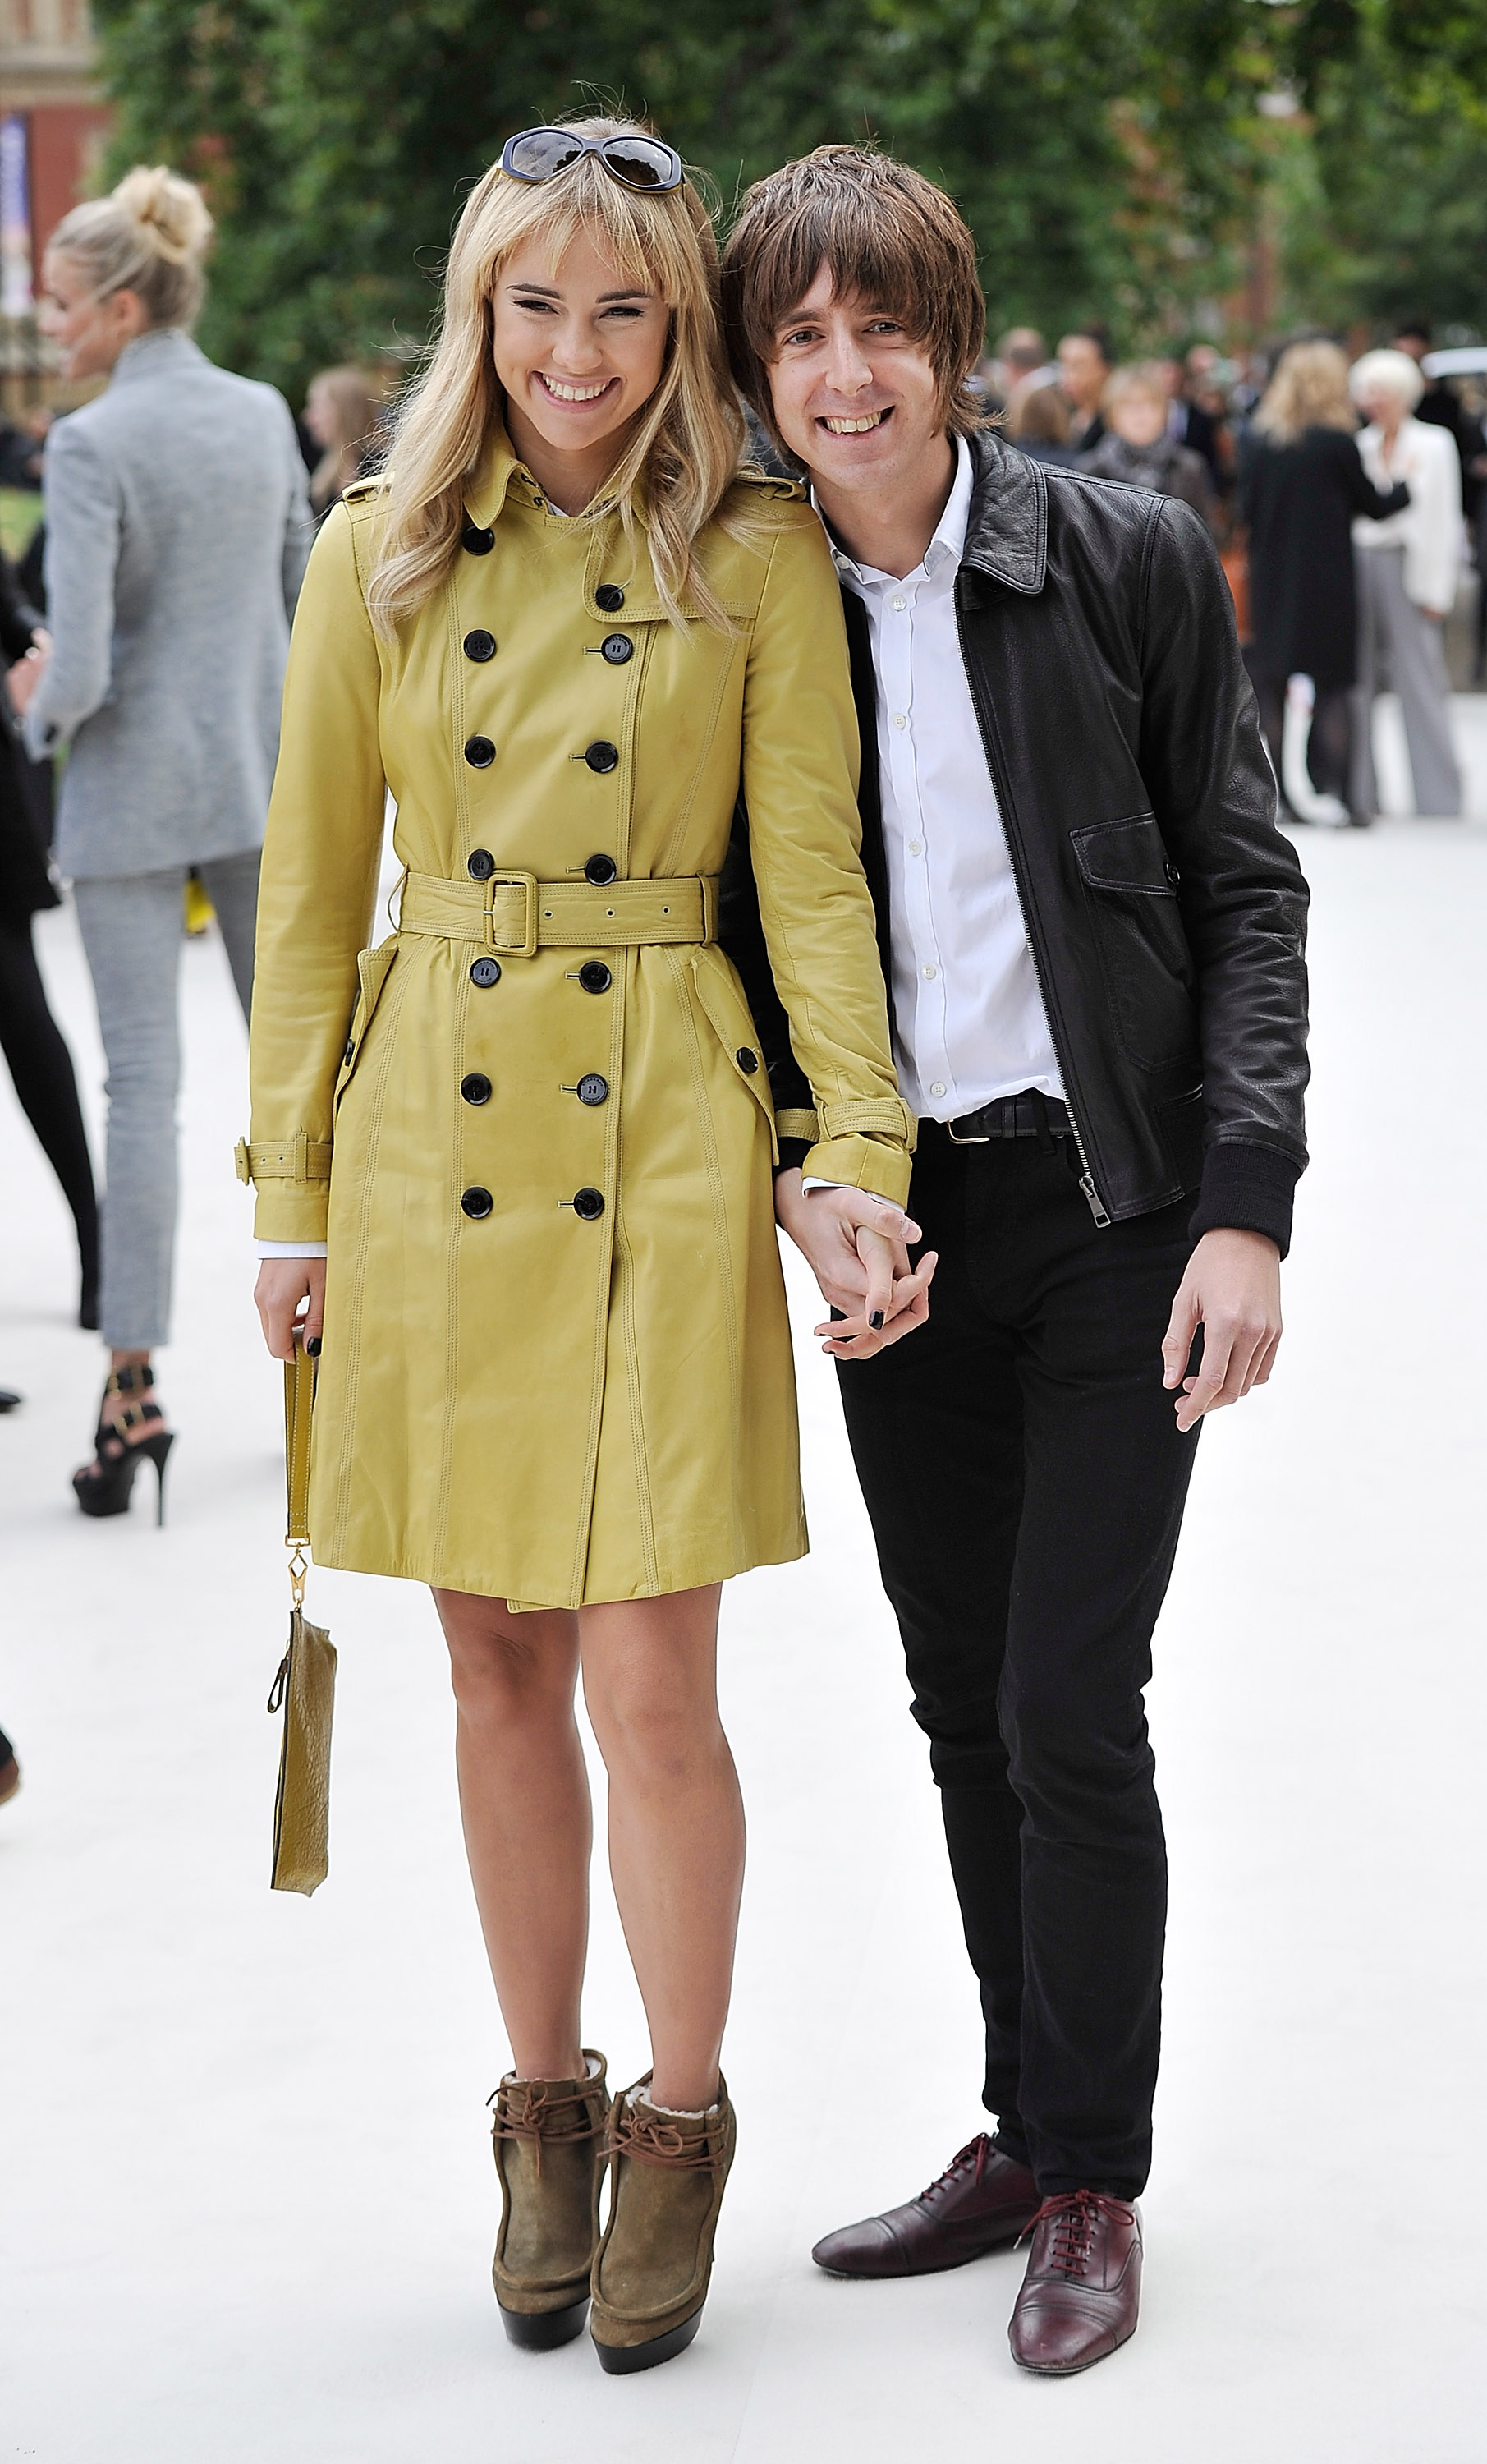 Suki Waterhouse Dating History Includes Famous Boyfriends, Exes | Life ...